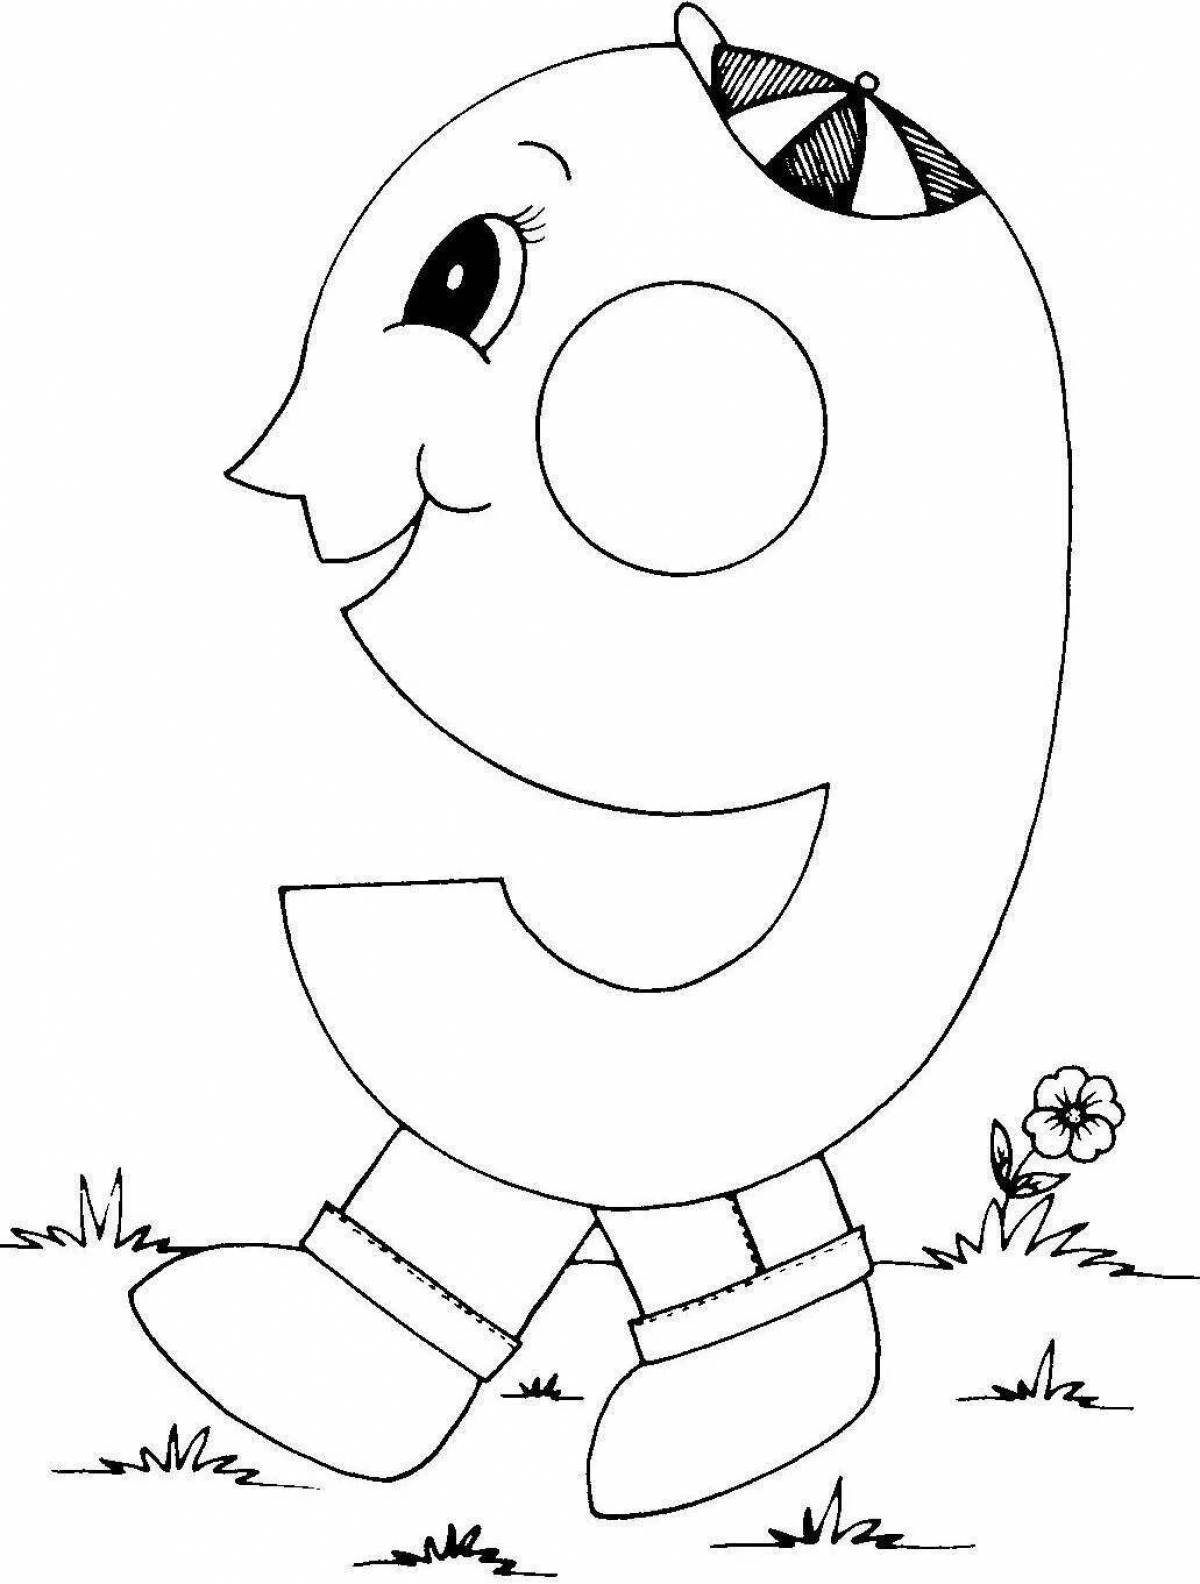 Color-mania funny numbers coloring page